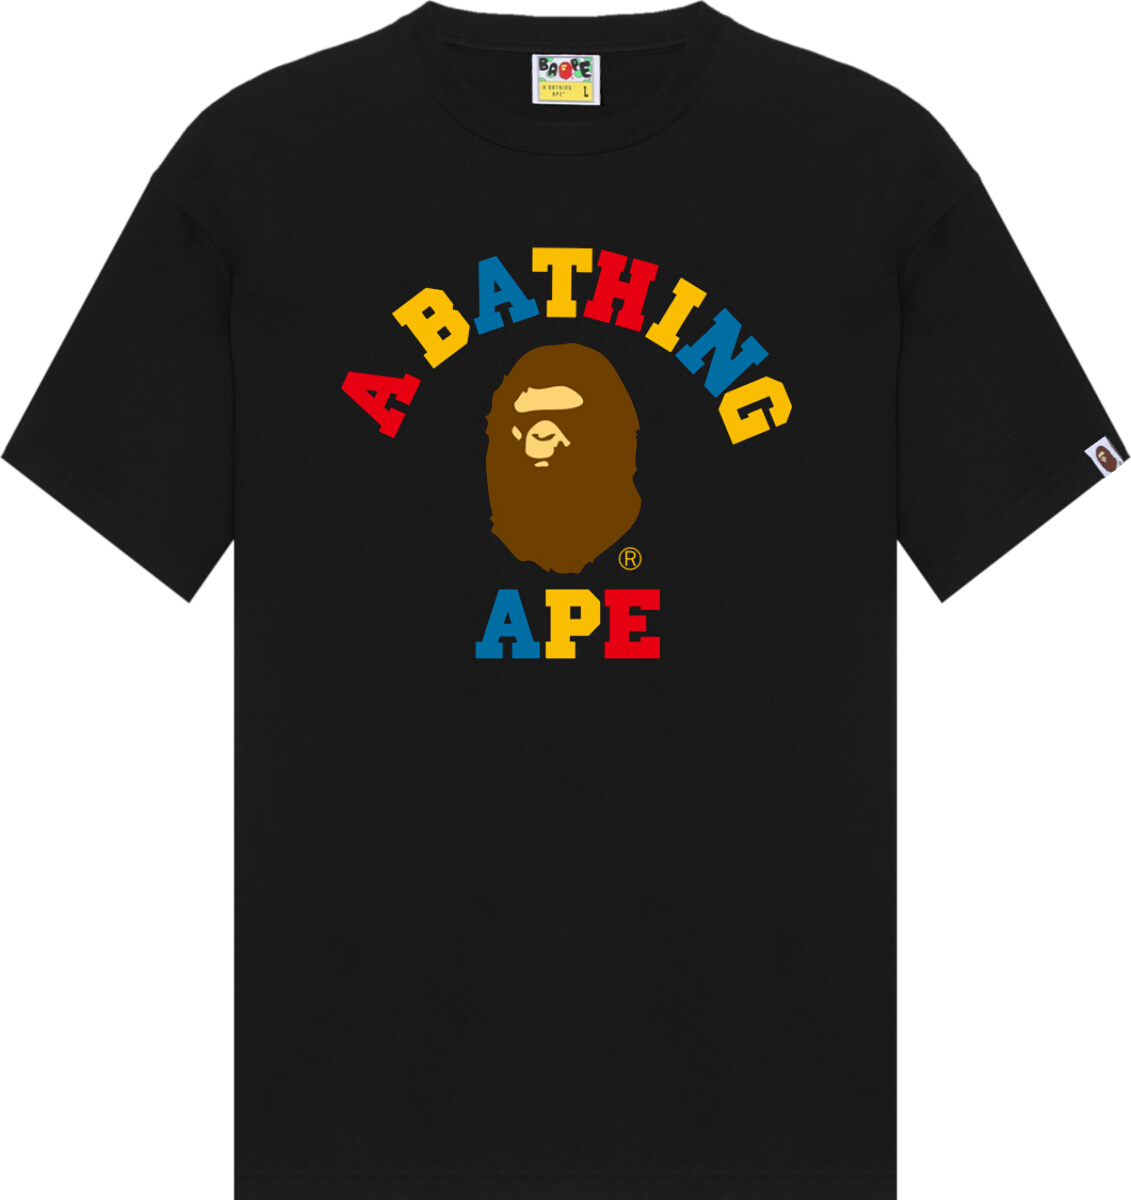 BAPE Black 'Color College' T-Shirt | Incorporated Style